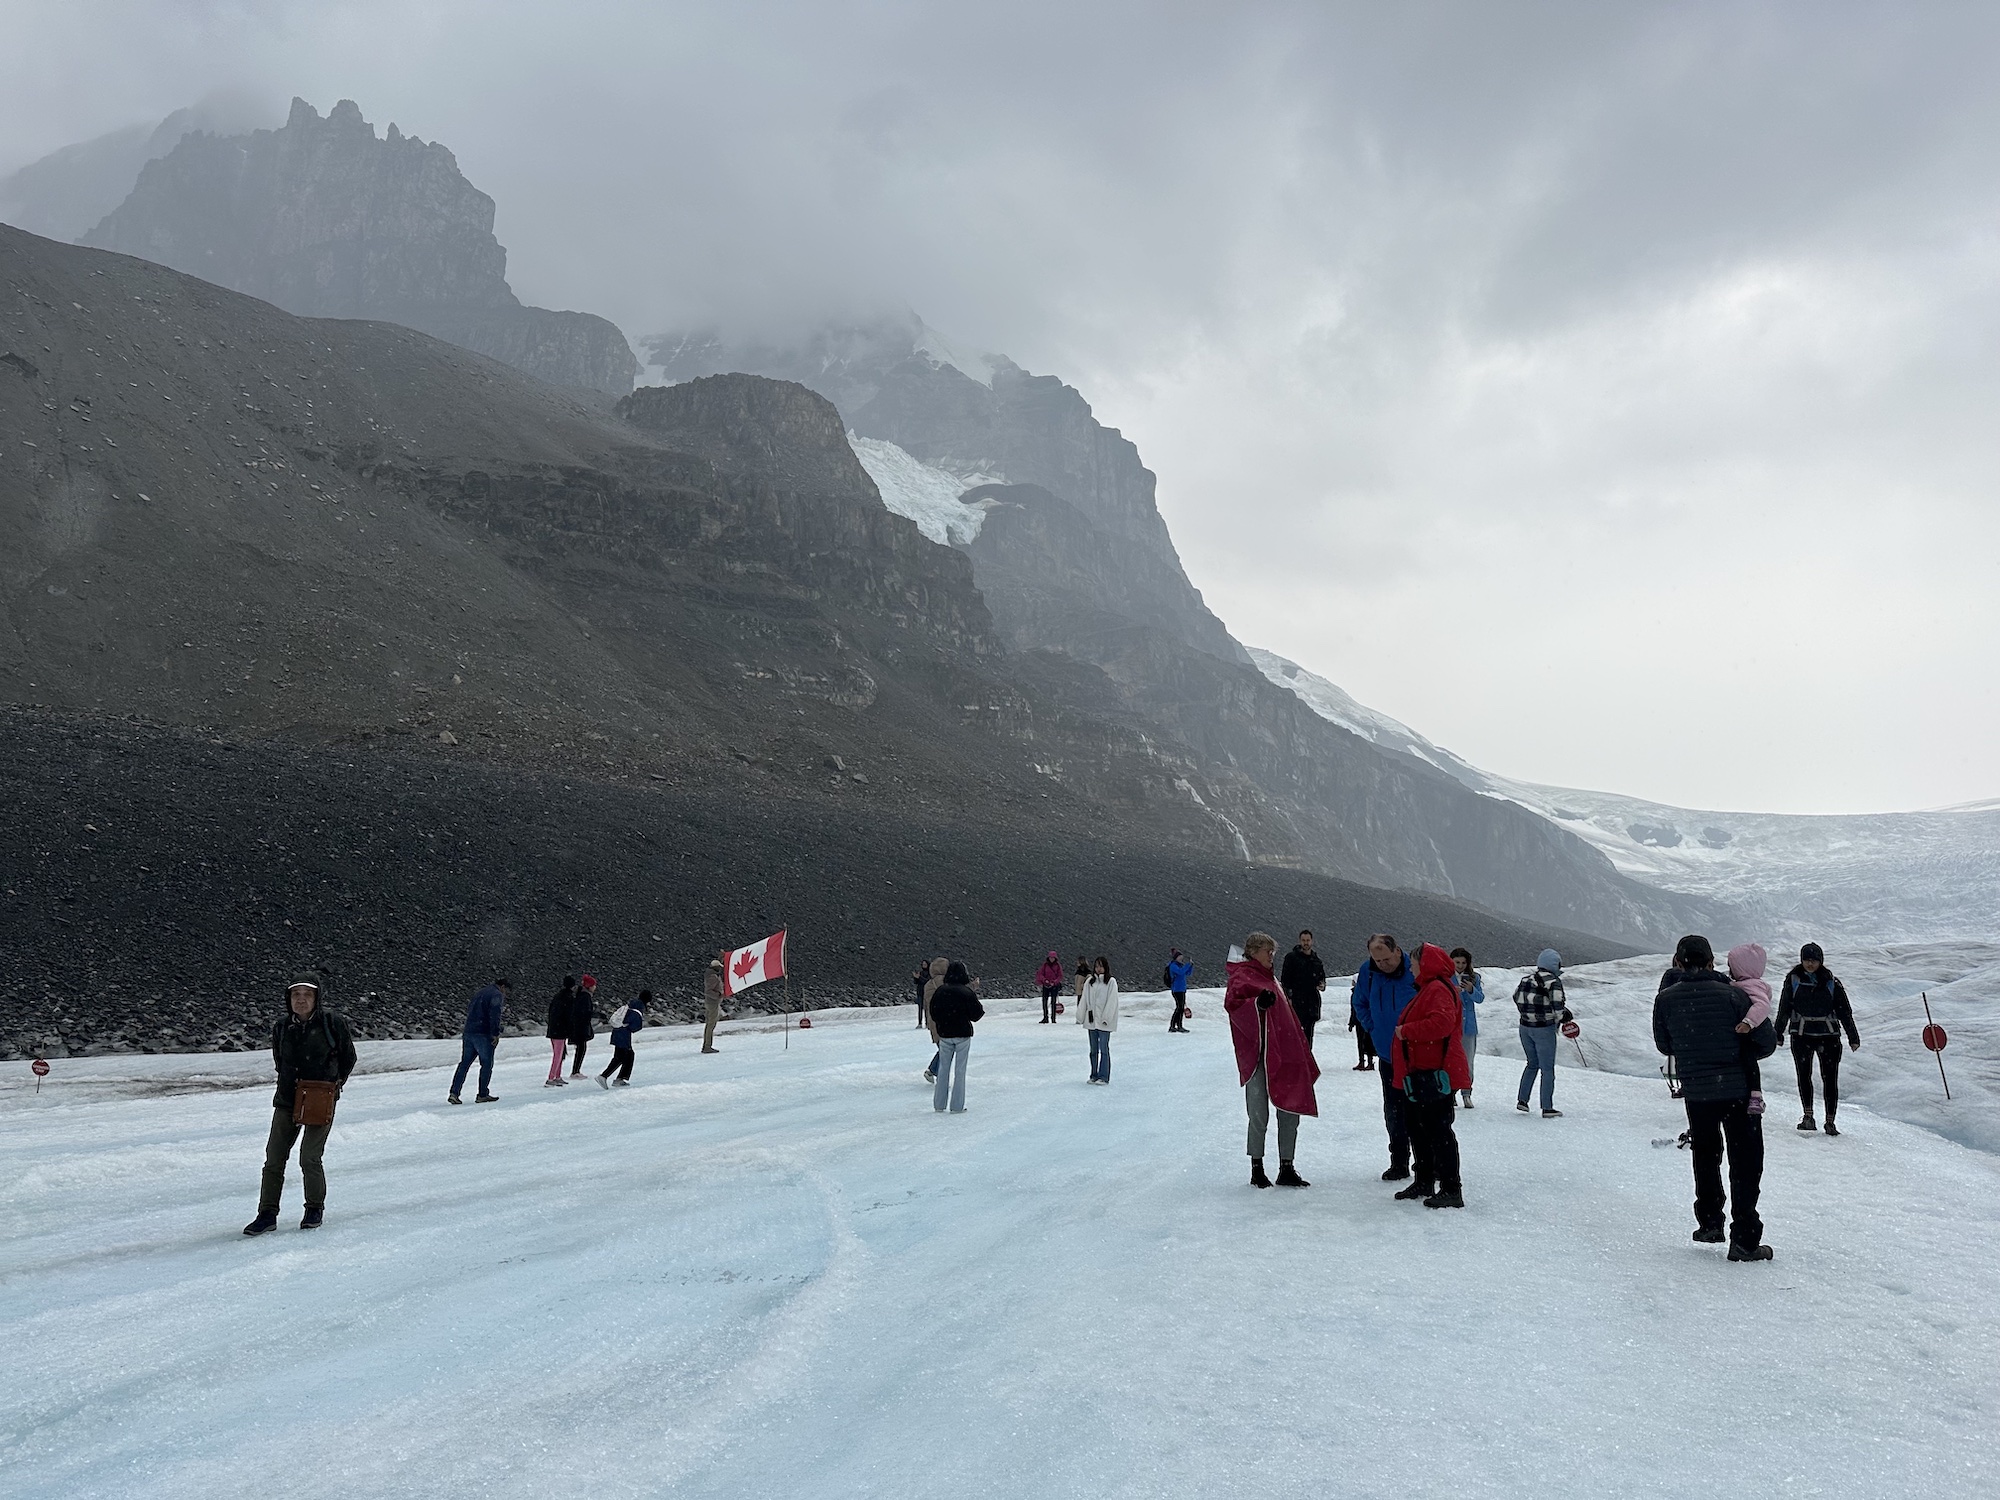 Icefield Explorer Tour on the Athabasca Glacier